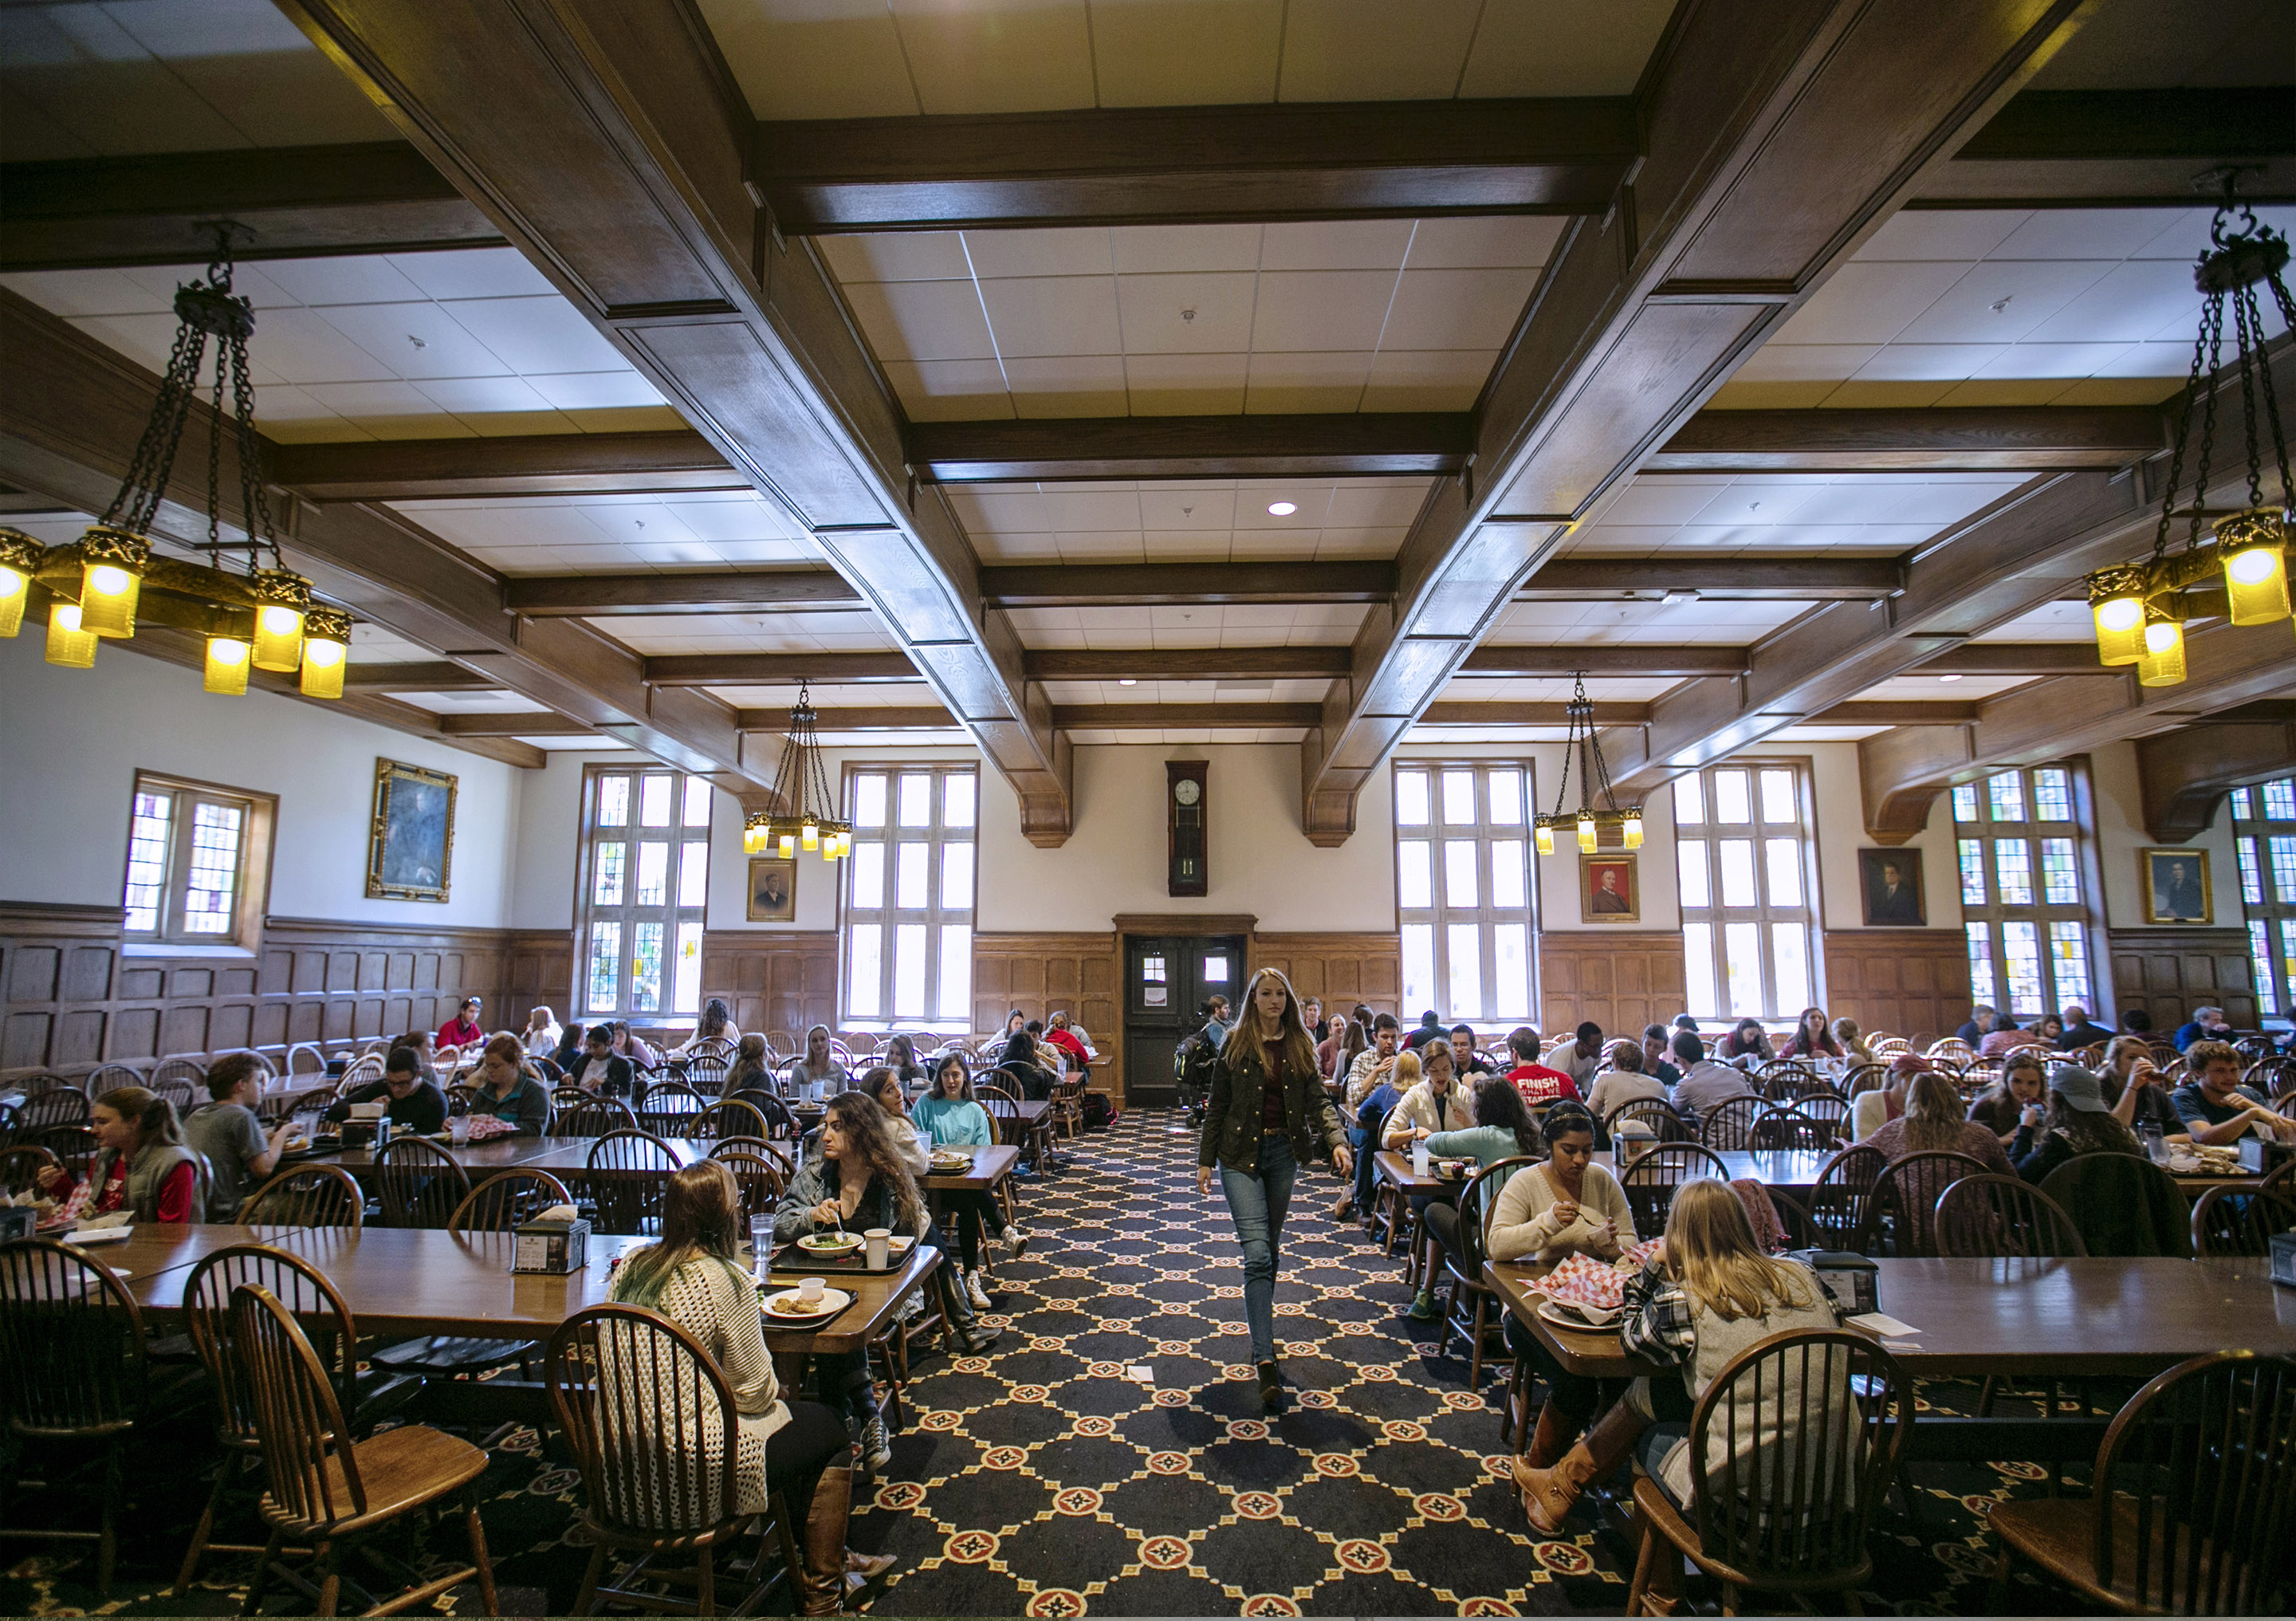 The main dining hall in the Catherine Burrow Refectory